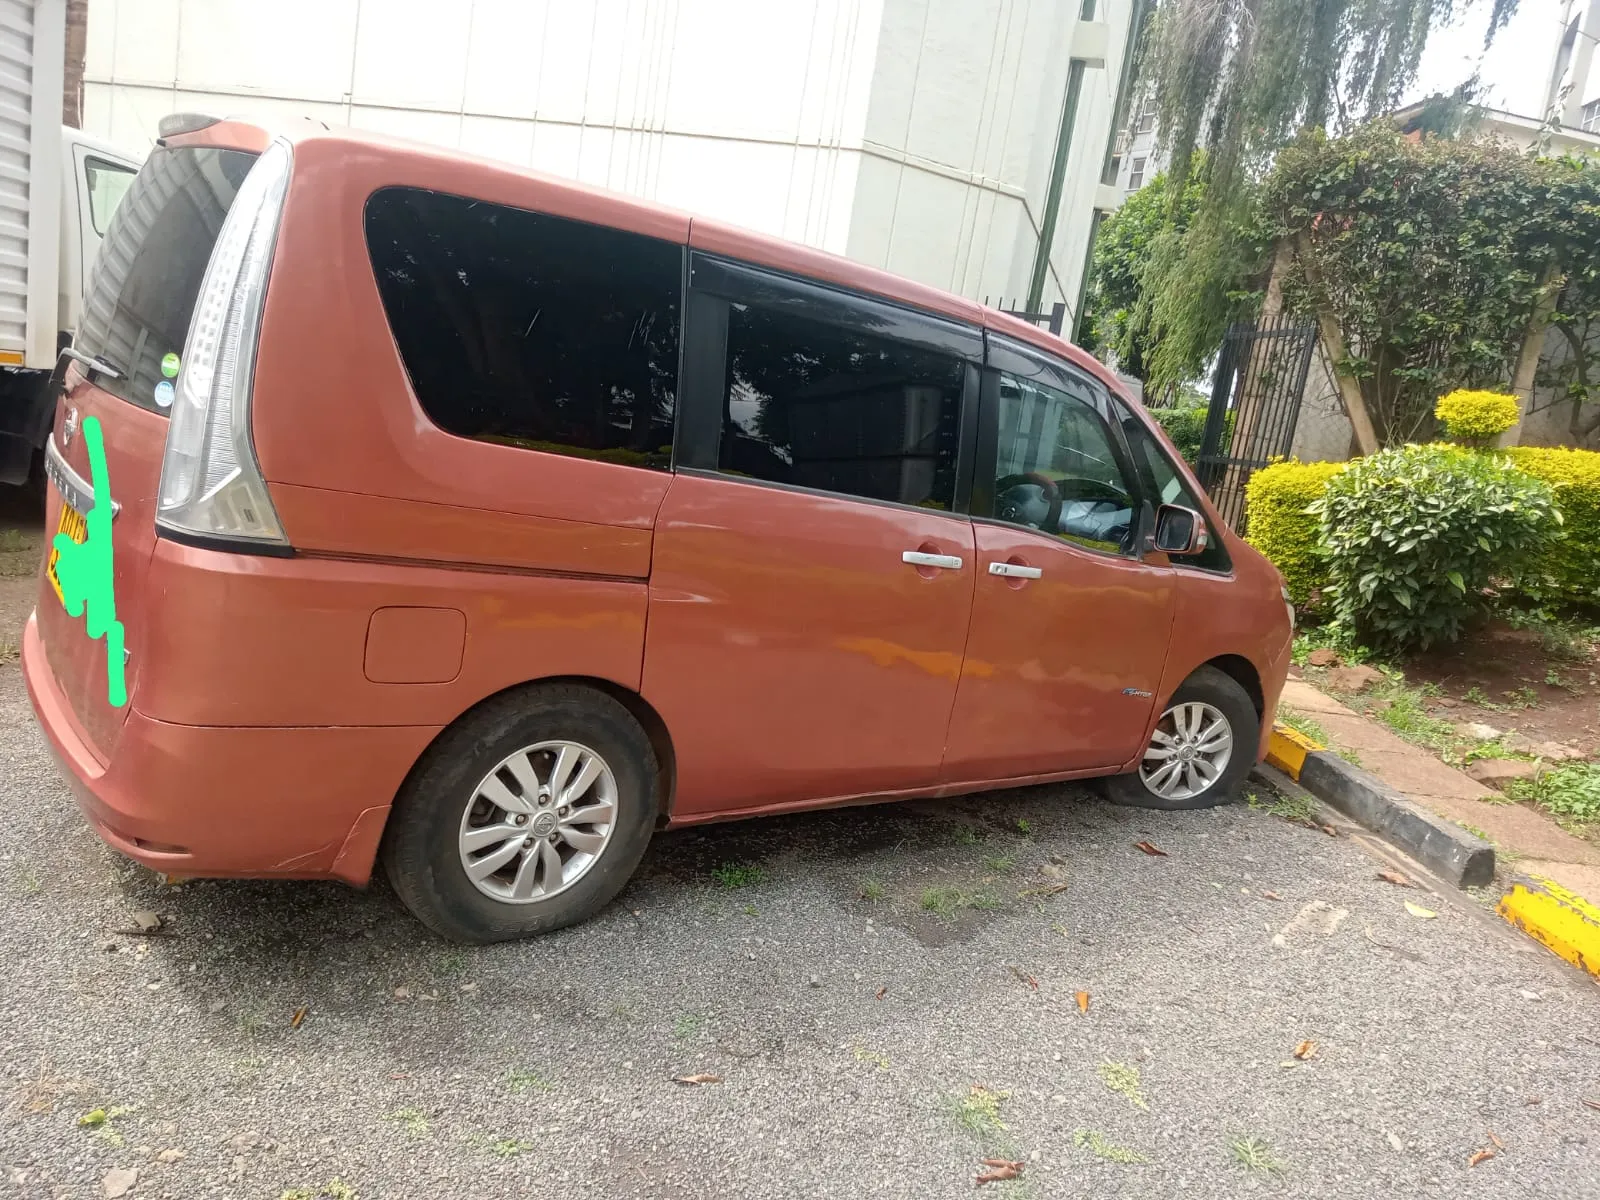 Cars Cars For Sale-Nissan Serena Van QUICK SALE You Pay 30% Deposit Trade in Ok Wow! 9